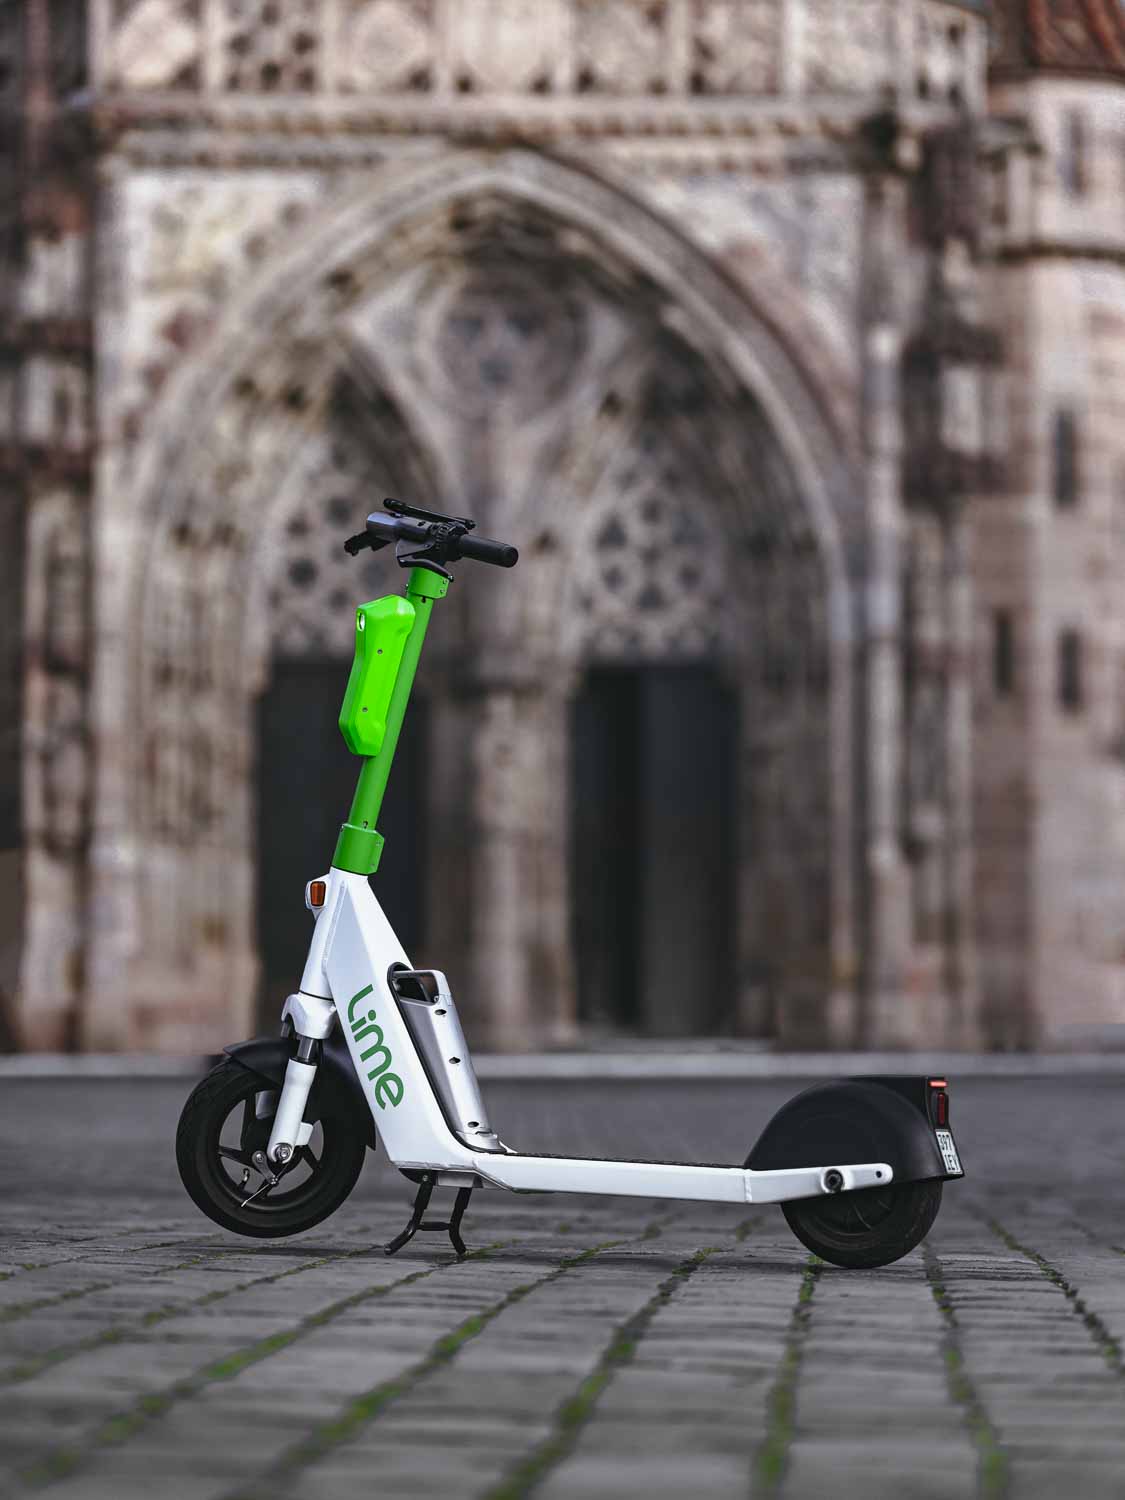 This picture by Philip Reitsperger and Identity Lab shows an e-scooter from Lime in Nuremberg in front of the Frauenkirche.